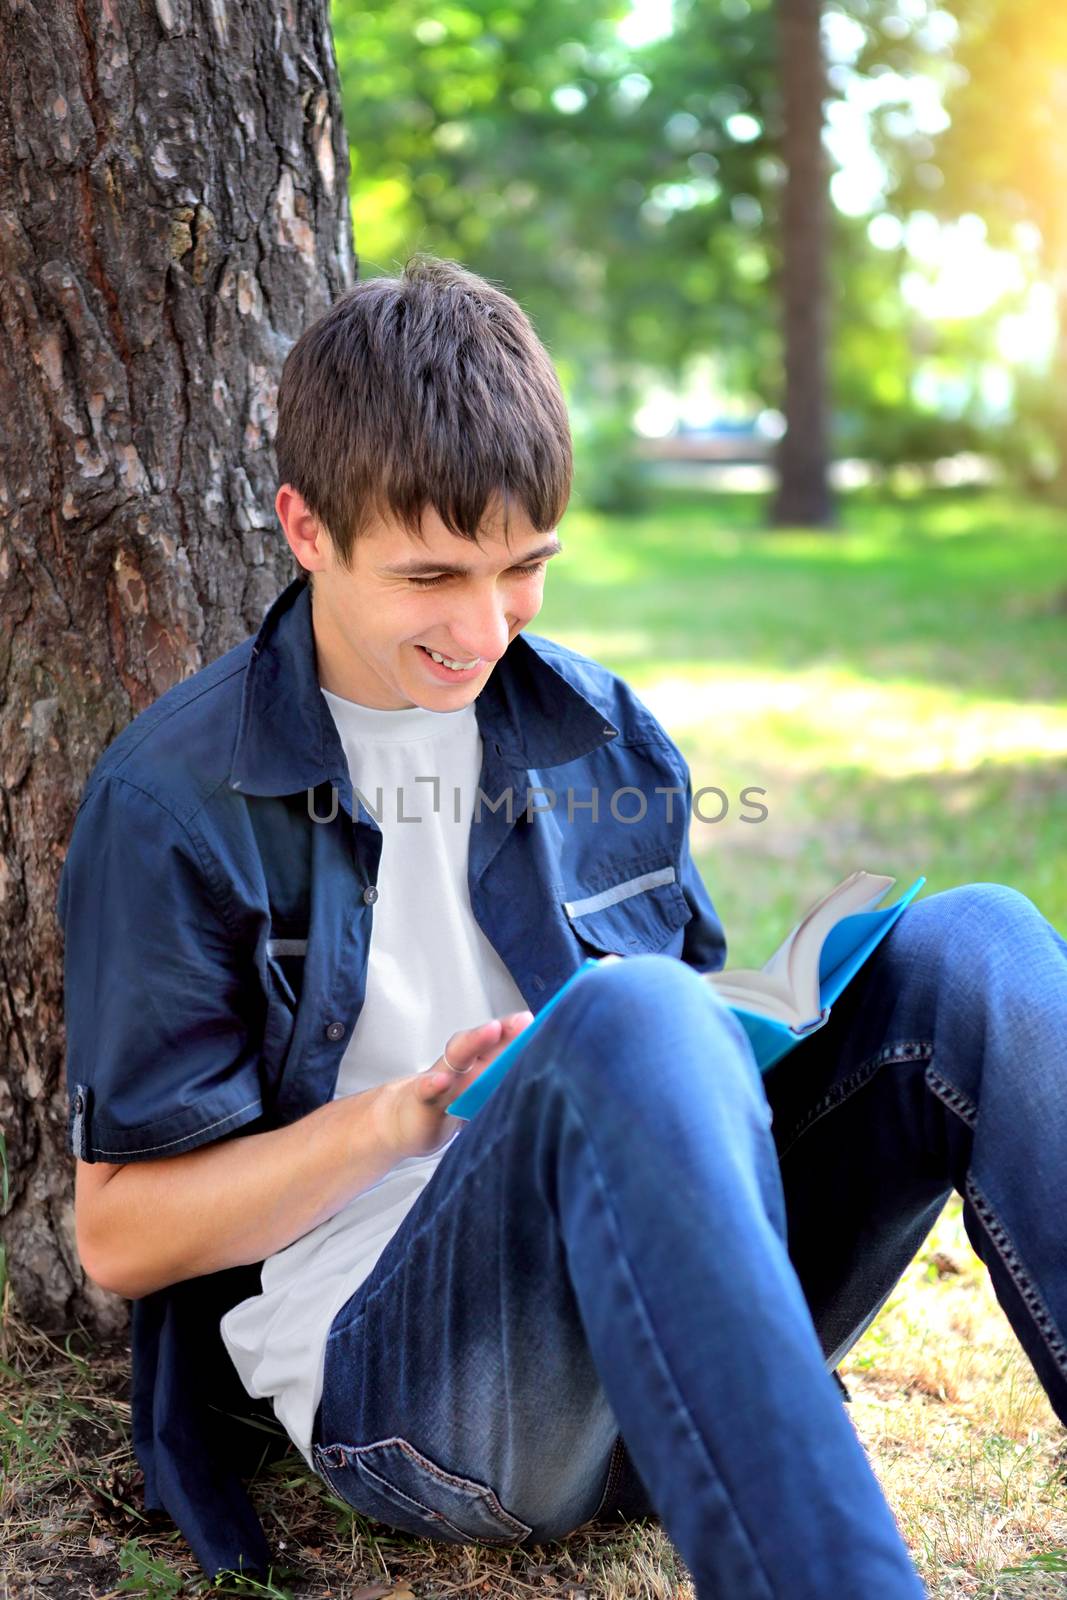 Cheerful Teenager with the Book under the Tree in the Summer Park